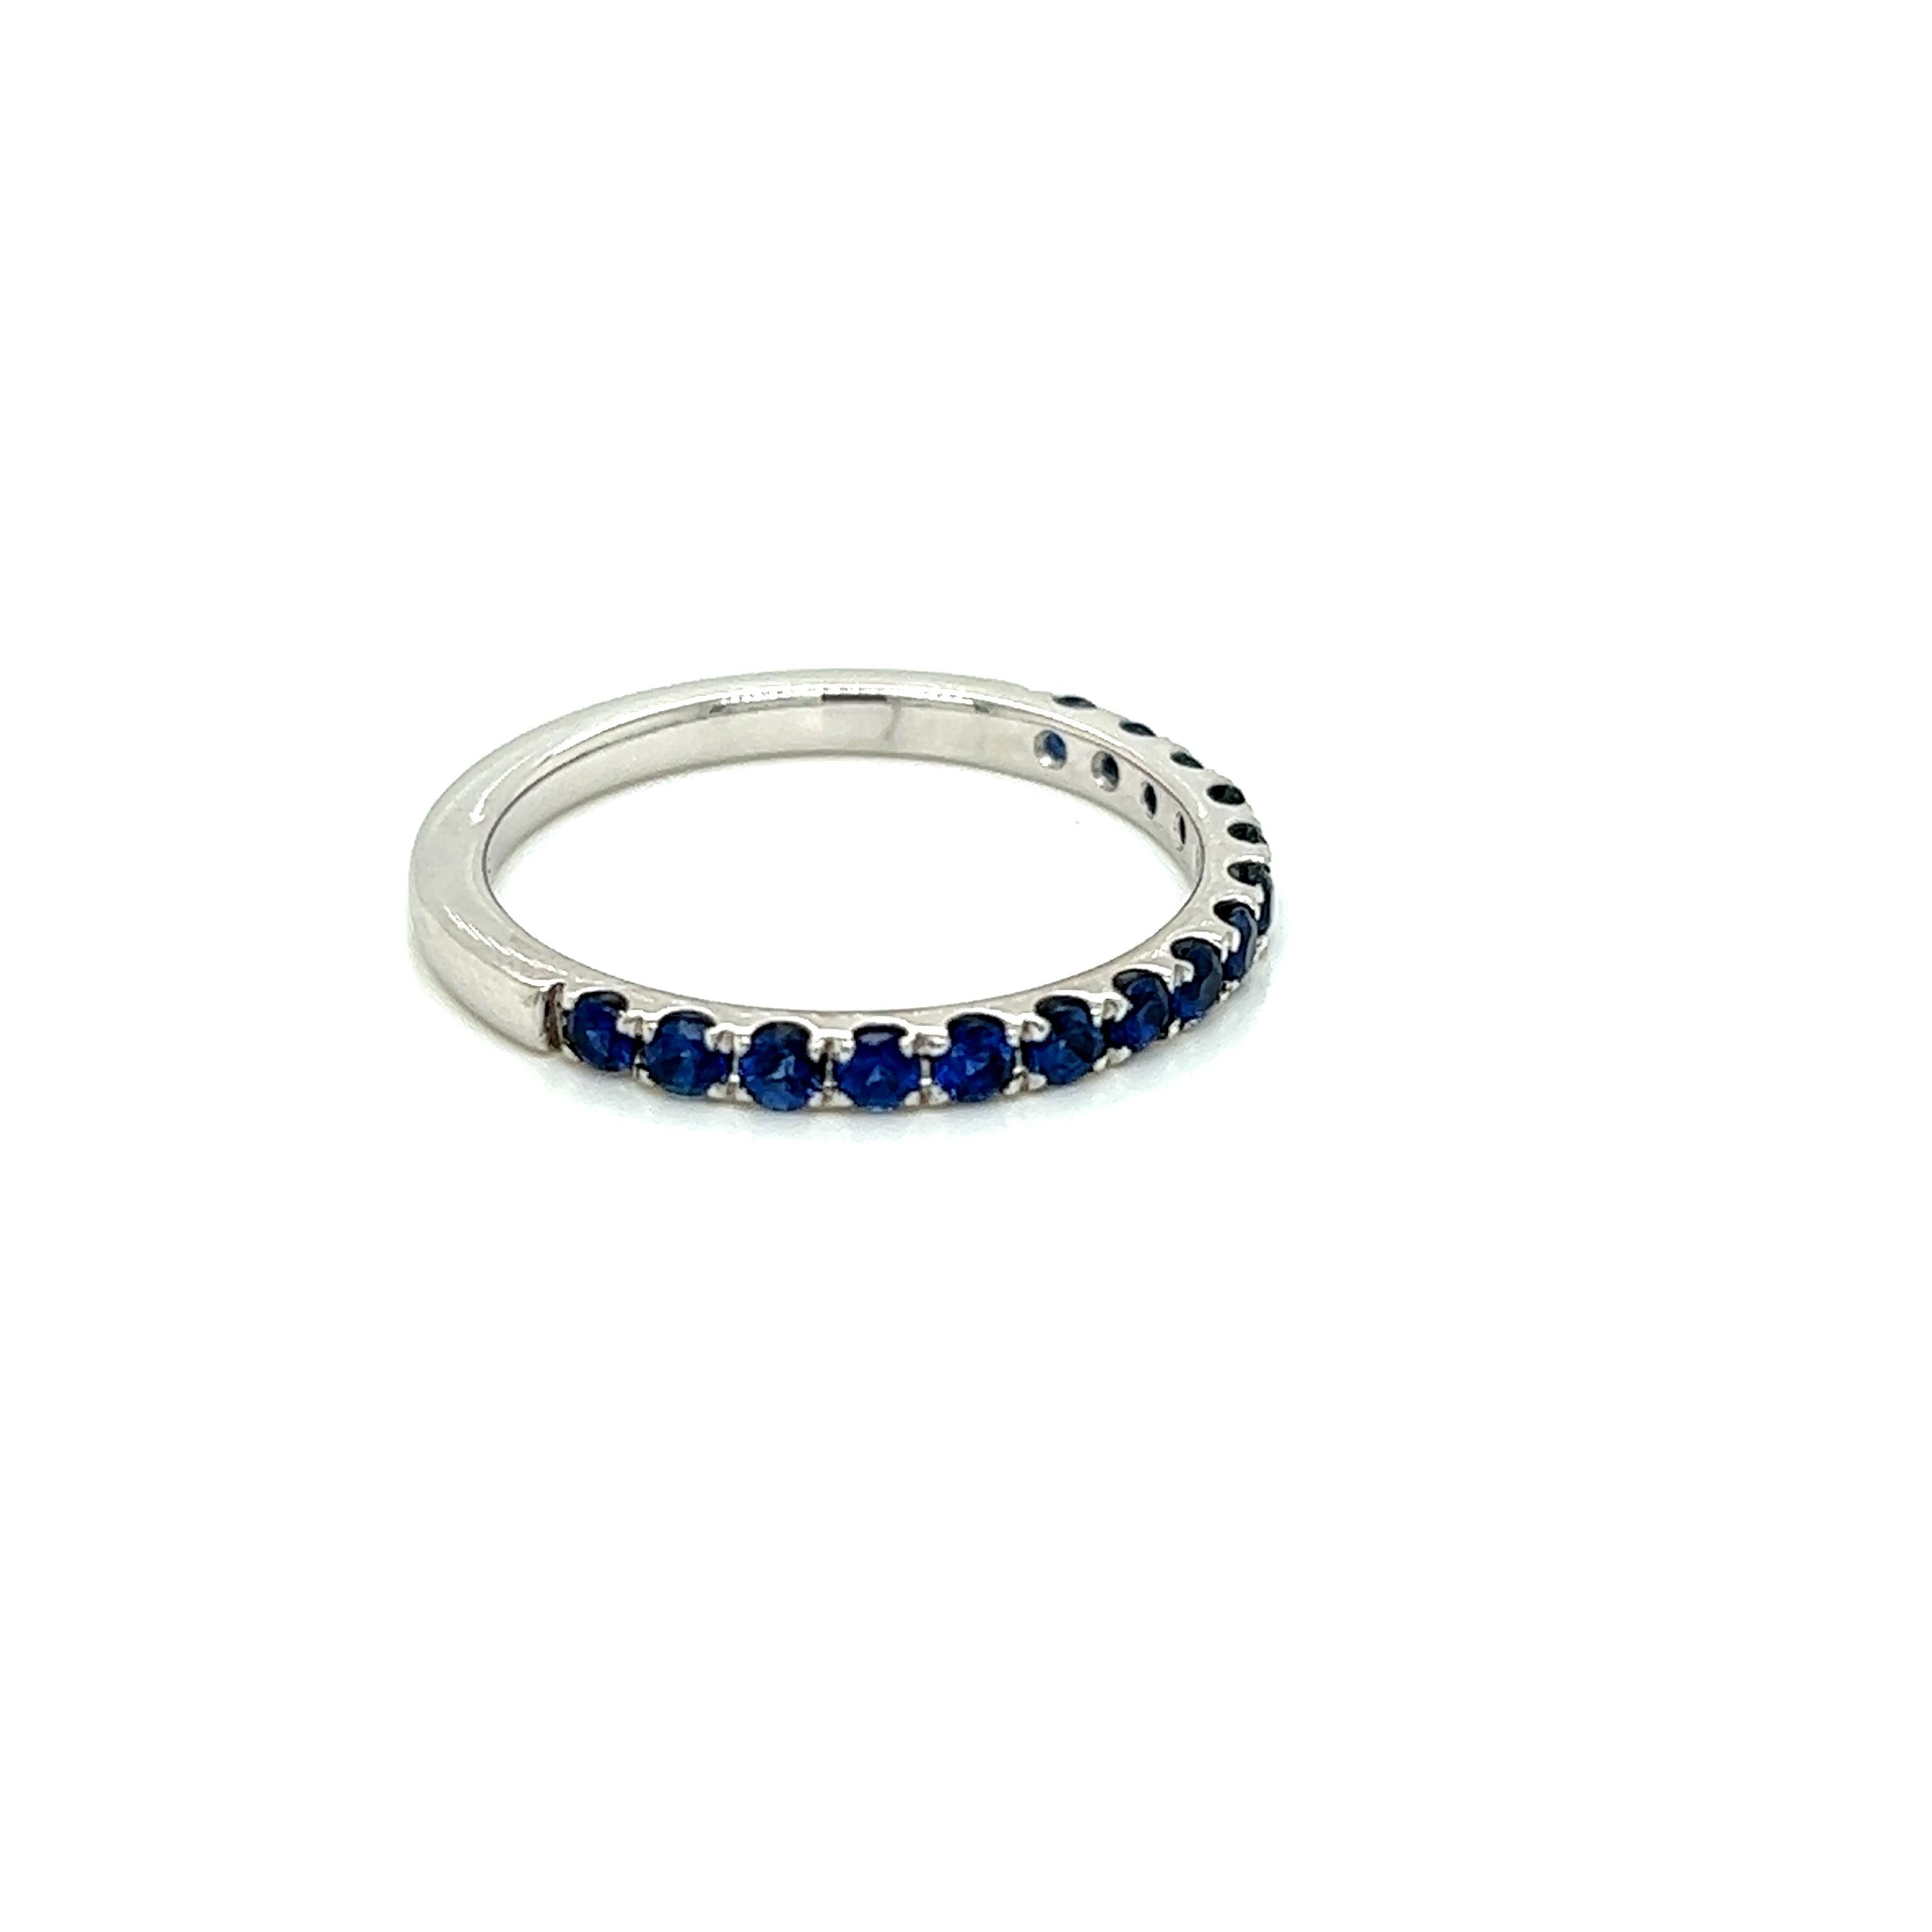 0.24 Carat Round Brilliant Blue Sapphire Band Ring in 18 Karat White Gold.

This timeless band ring features a row of round brilliant blue sapphires weighing 0.24 carats in total. The Sapphires are held in a micro setting on a flawless 18K White